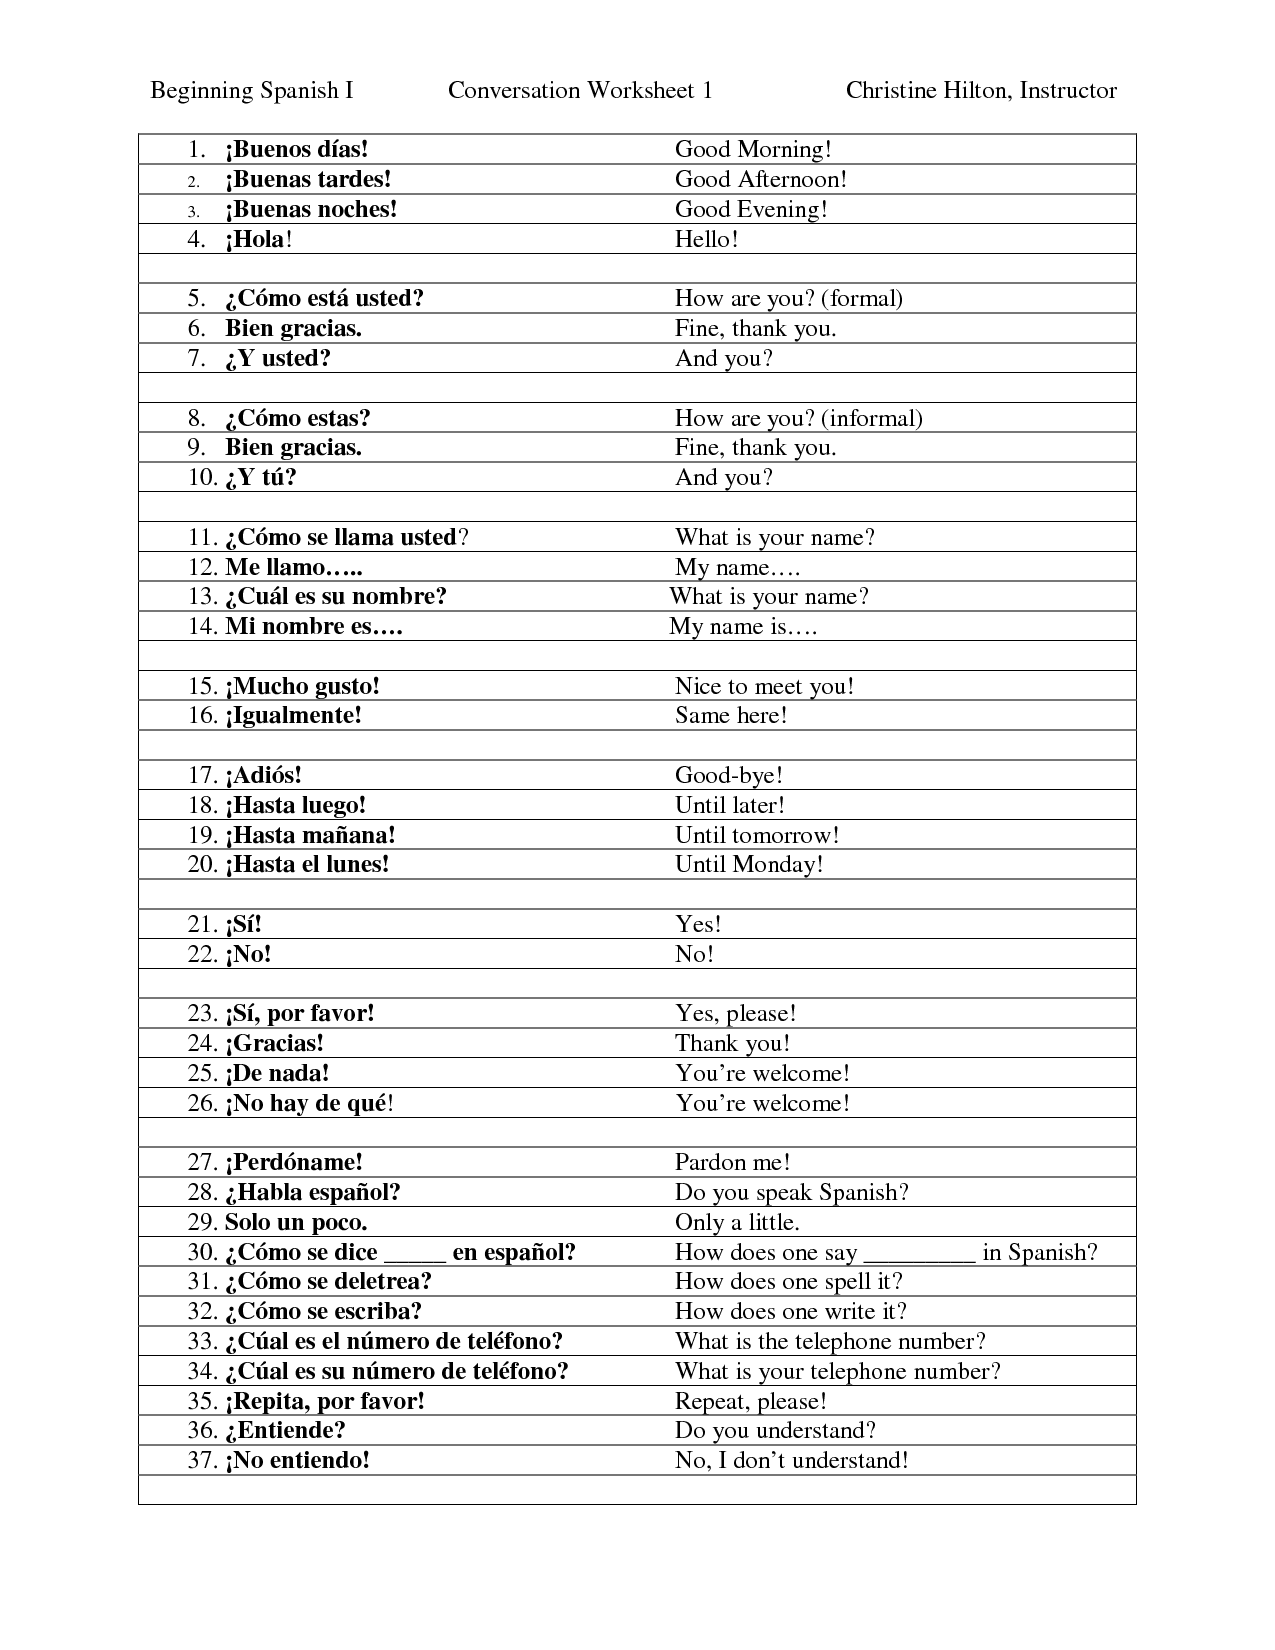 16-best-images-of-worksheet-spanish-conversations-for-beginners